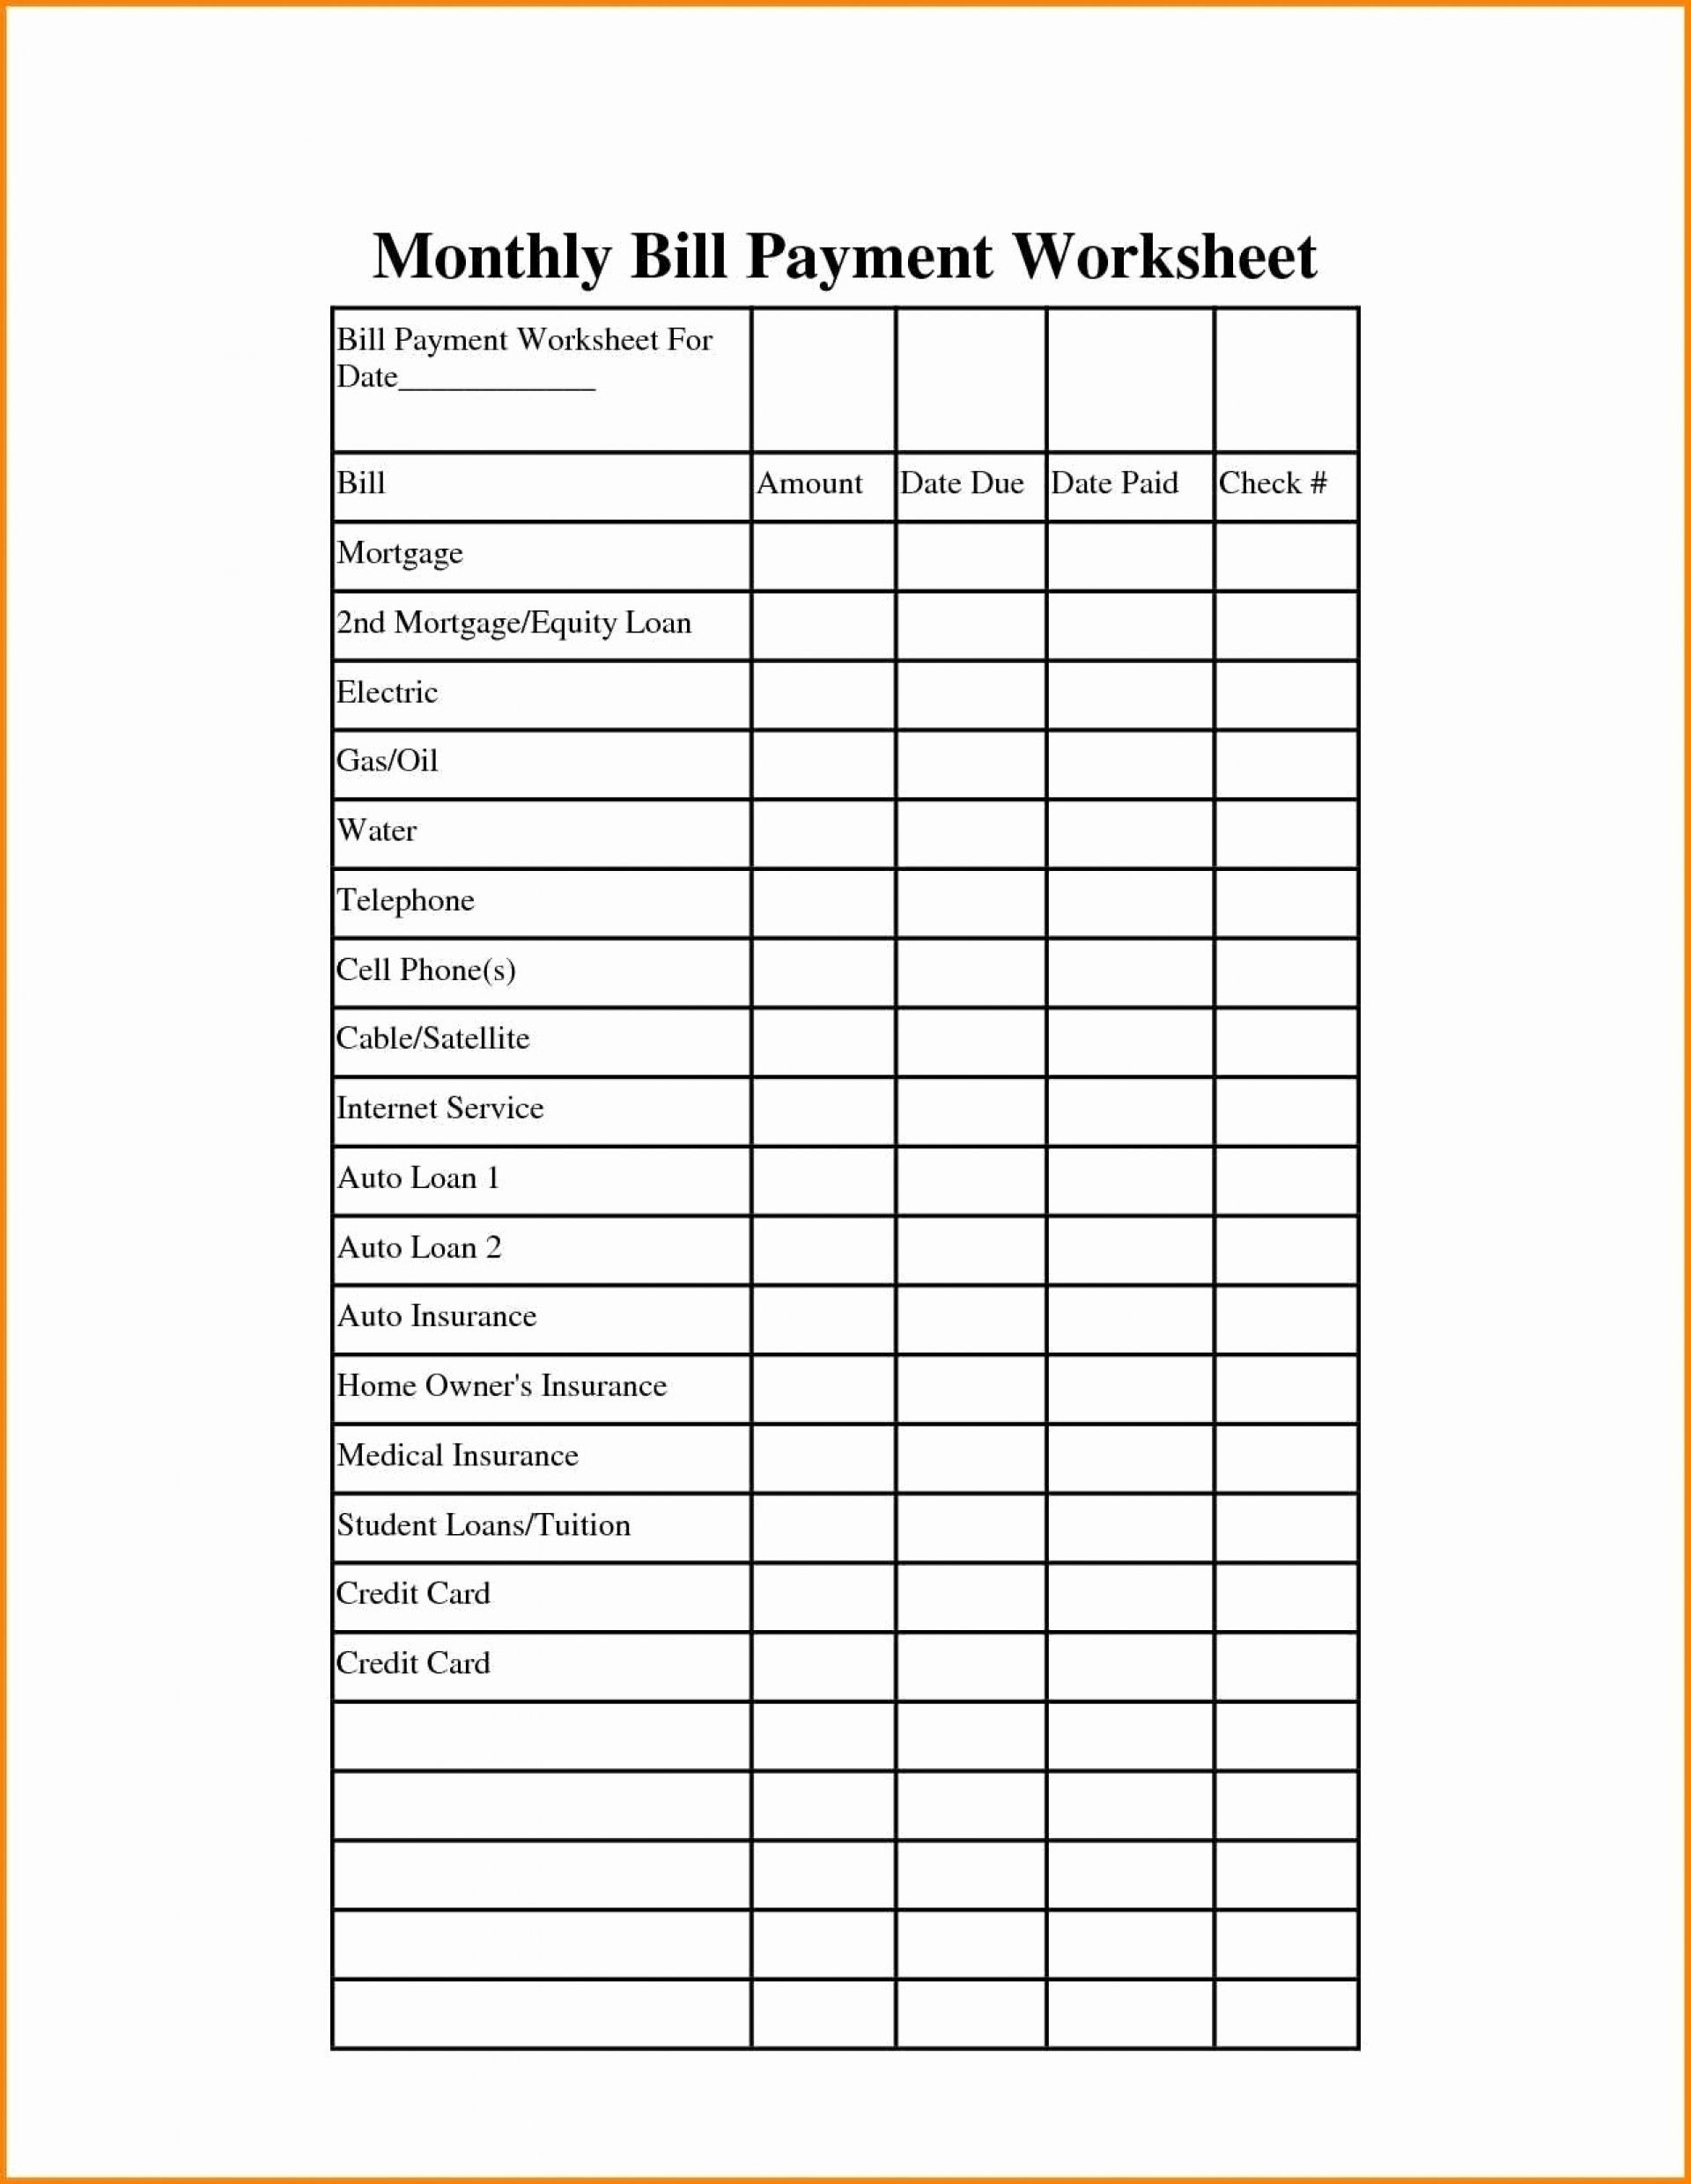 Get Monthly Bill Payment Worksheet